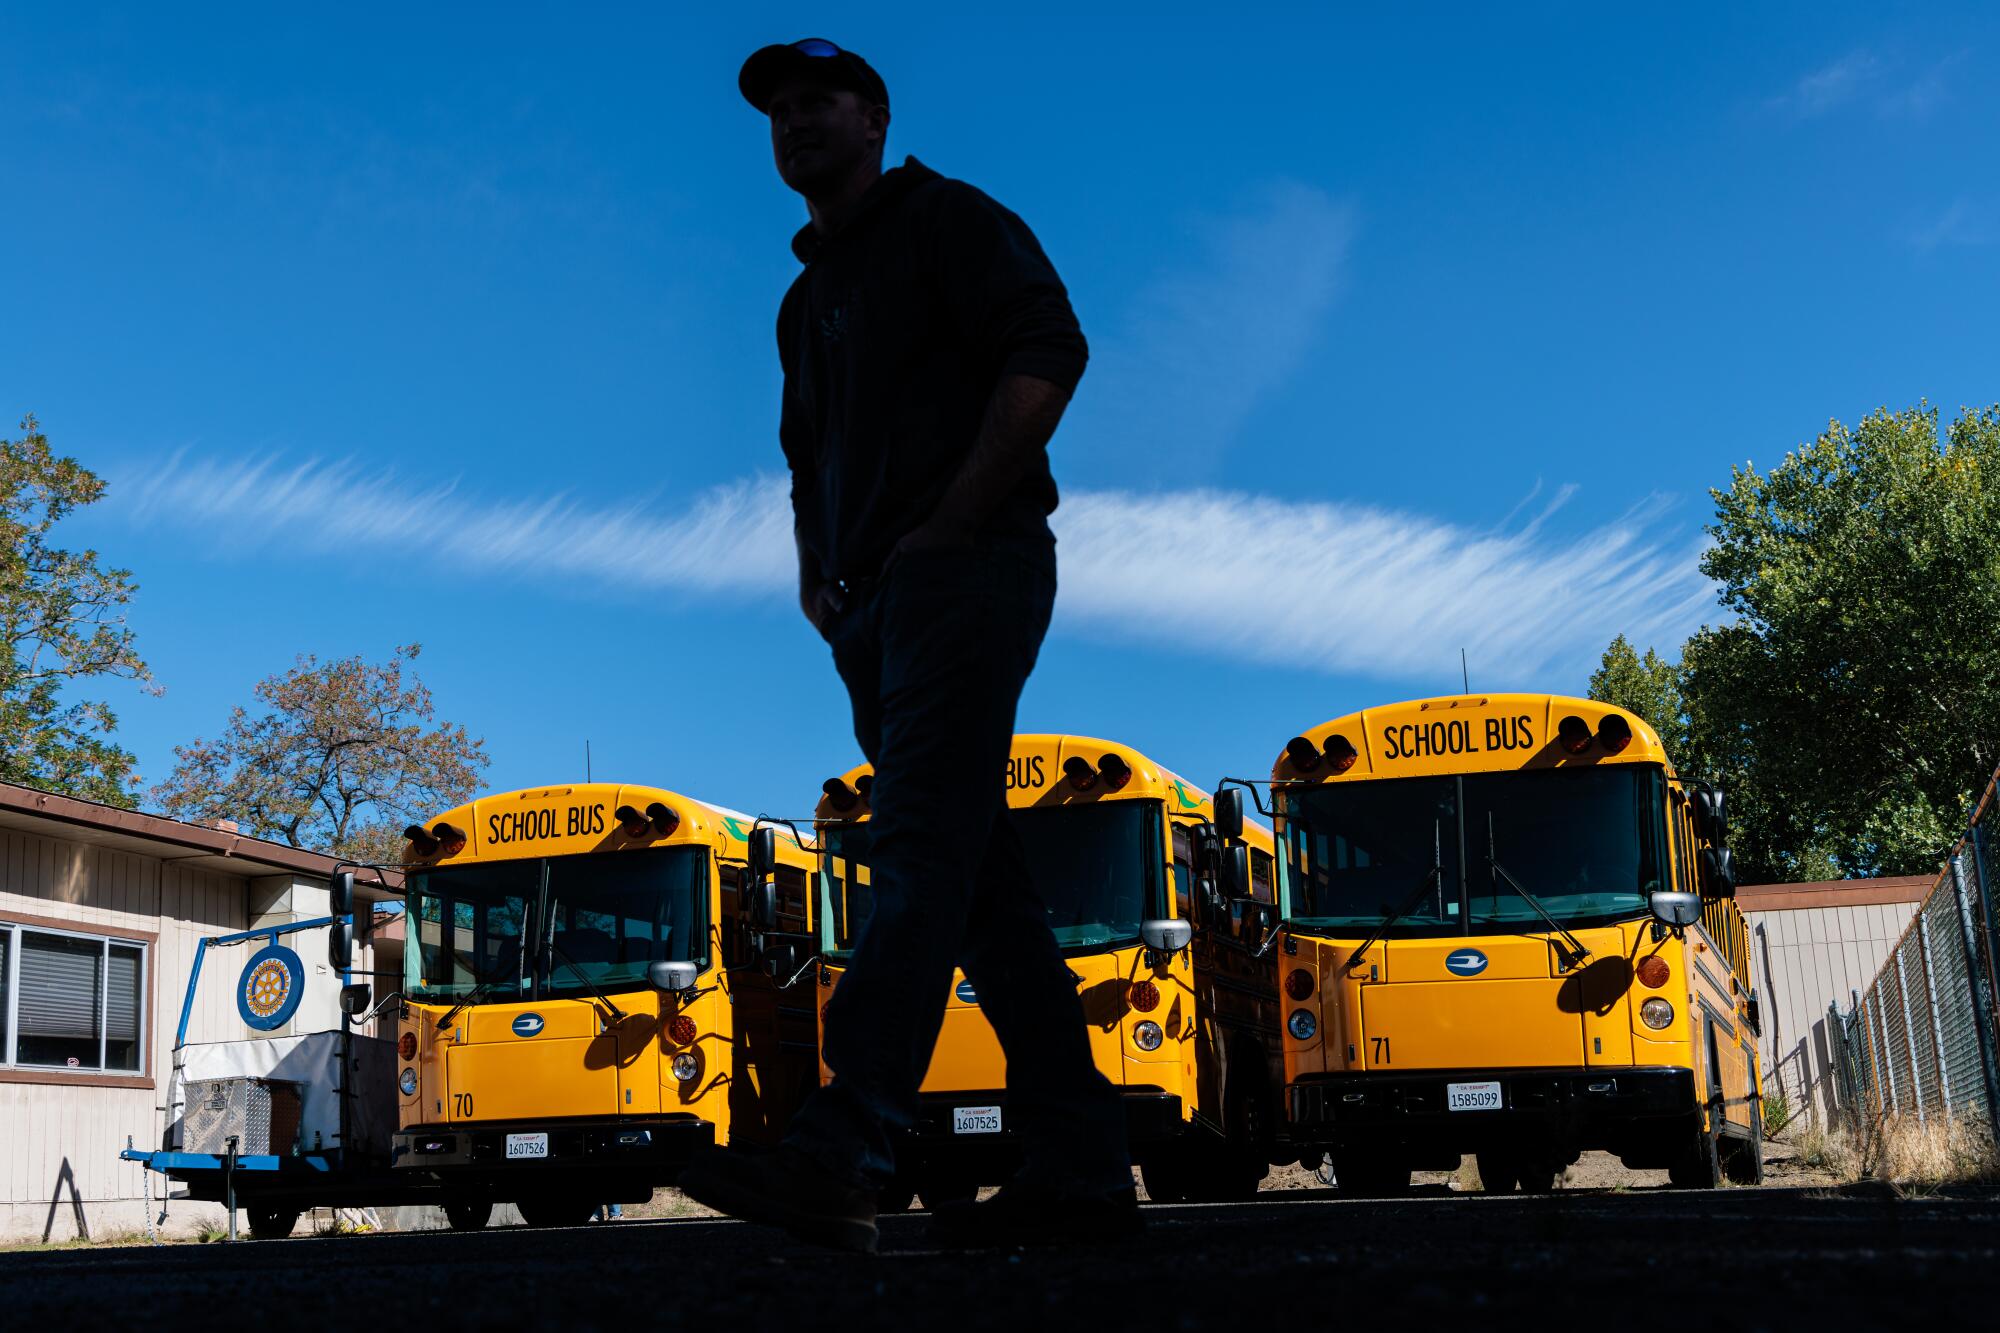 A man is silhouetted as he walks past a row of school buses.